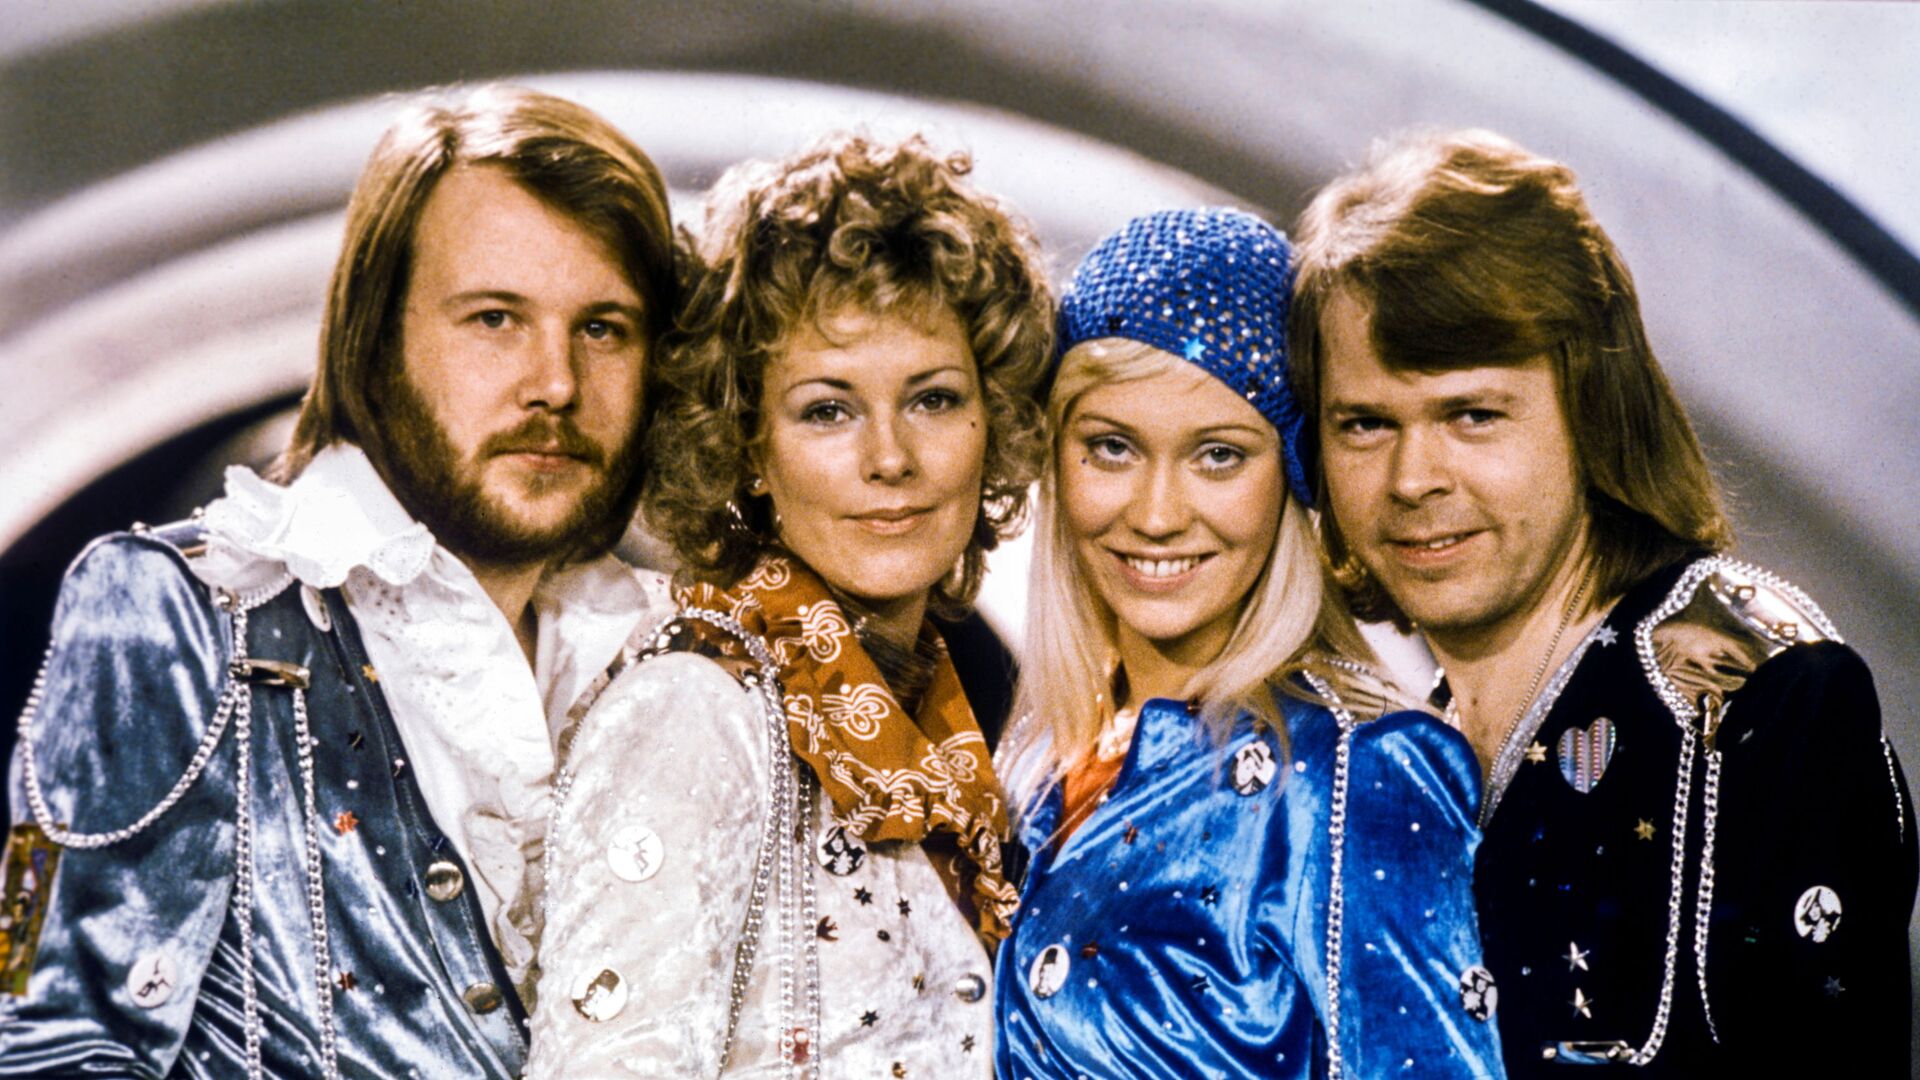 Swedish pop group Abba: Benny Andersson, Anni-Frid Lyngstad, Agnetha Faltskog and Bjorn Ulvaeus pose after winning the Swedish branch of the Eurovision Song Contest with their song Waterloo, February 9, 1974. - Sputnik International, 1920, 03.09.2021